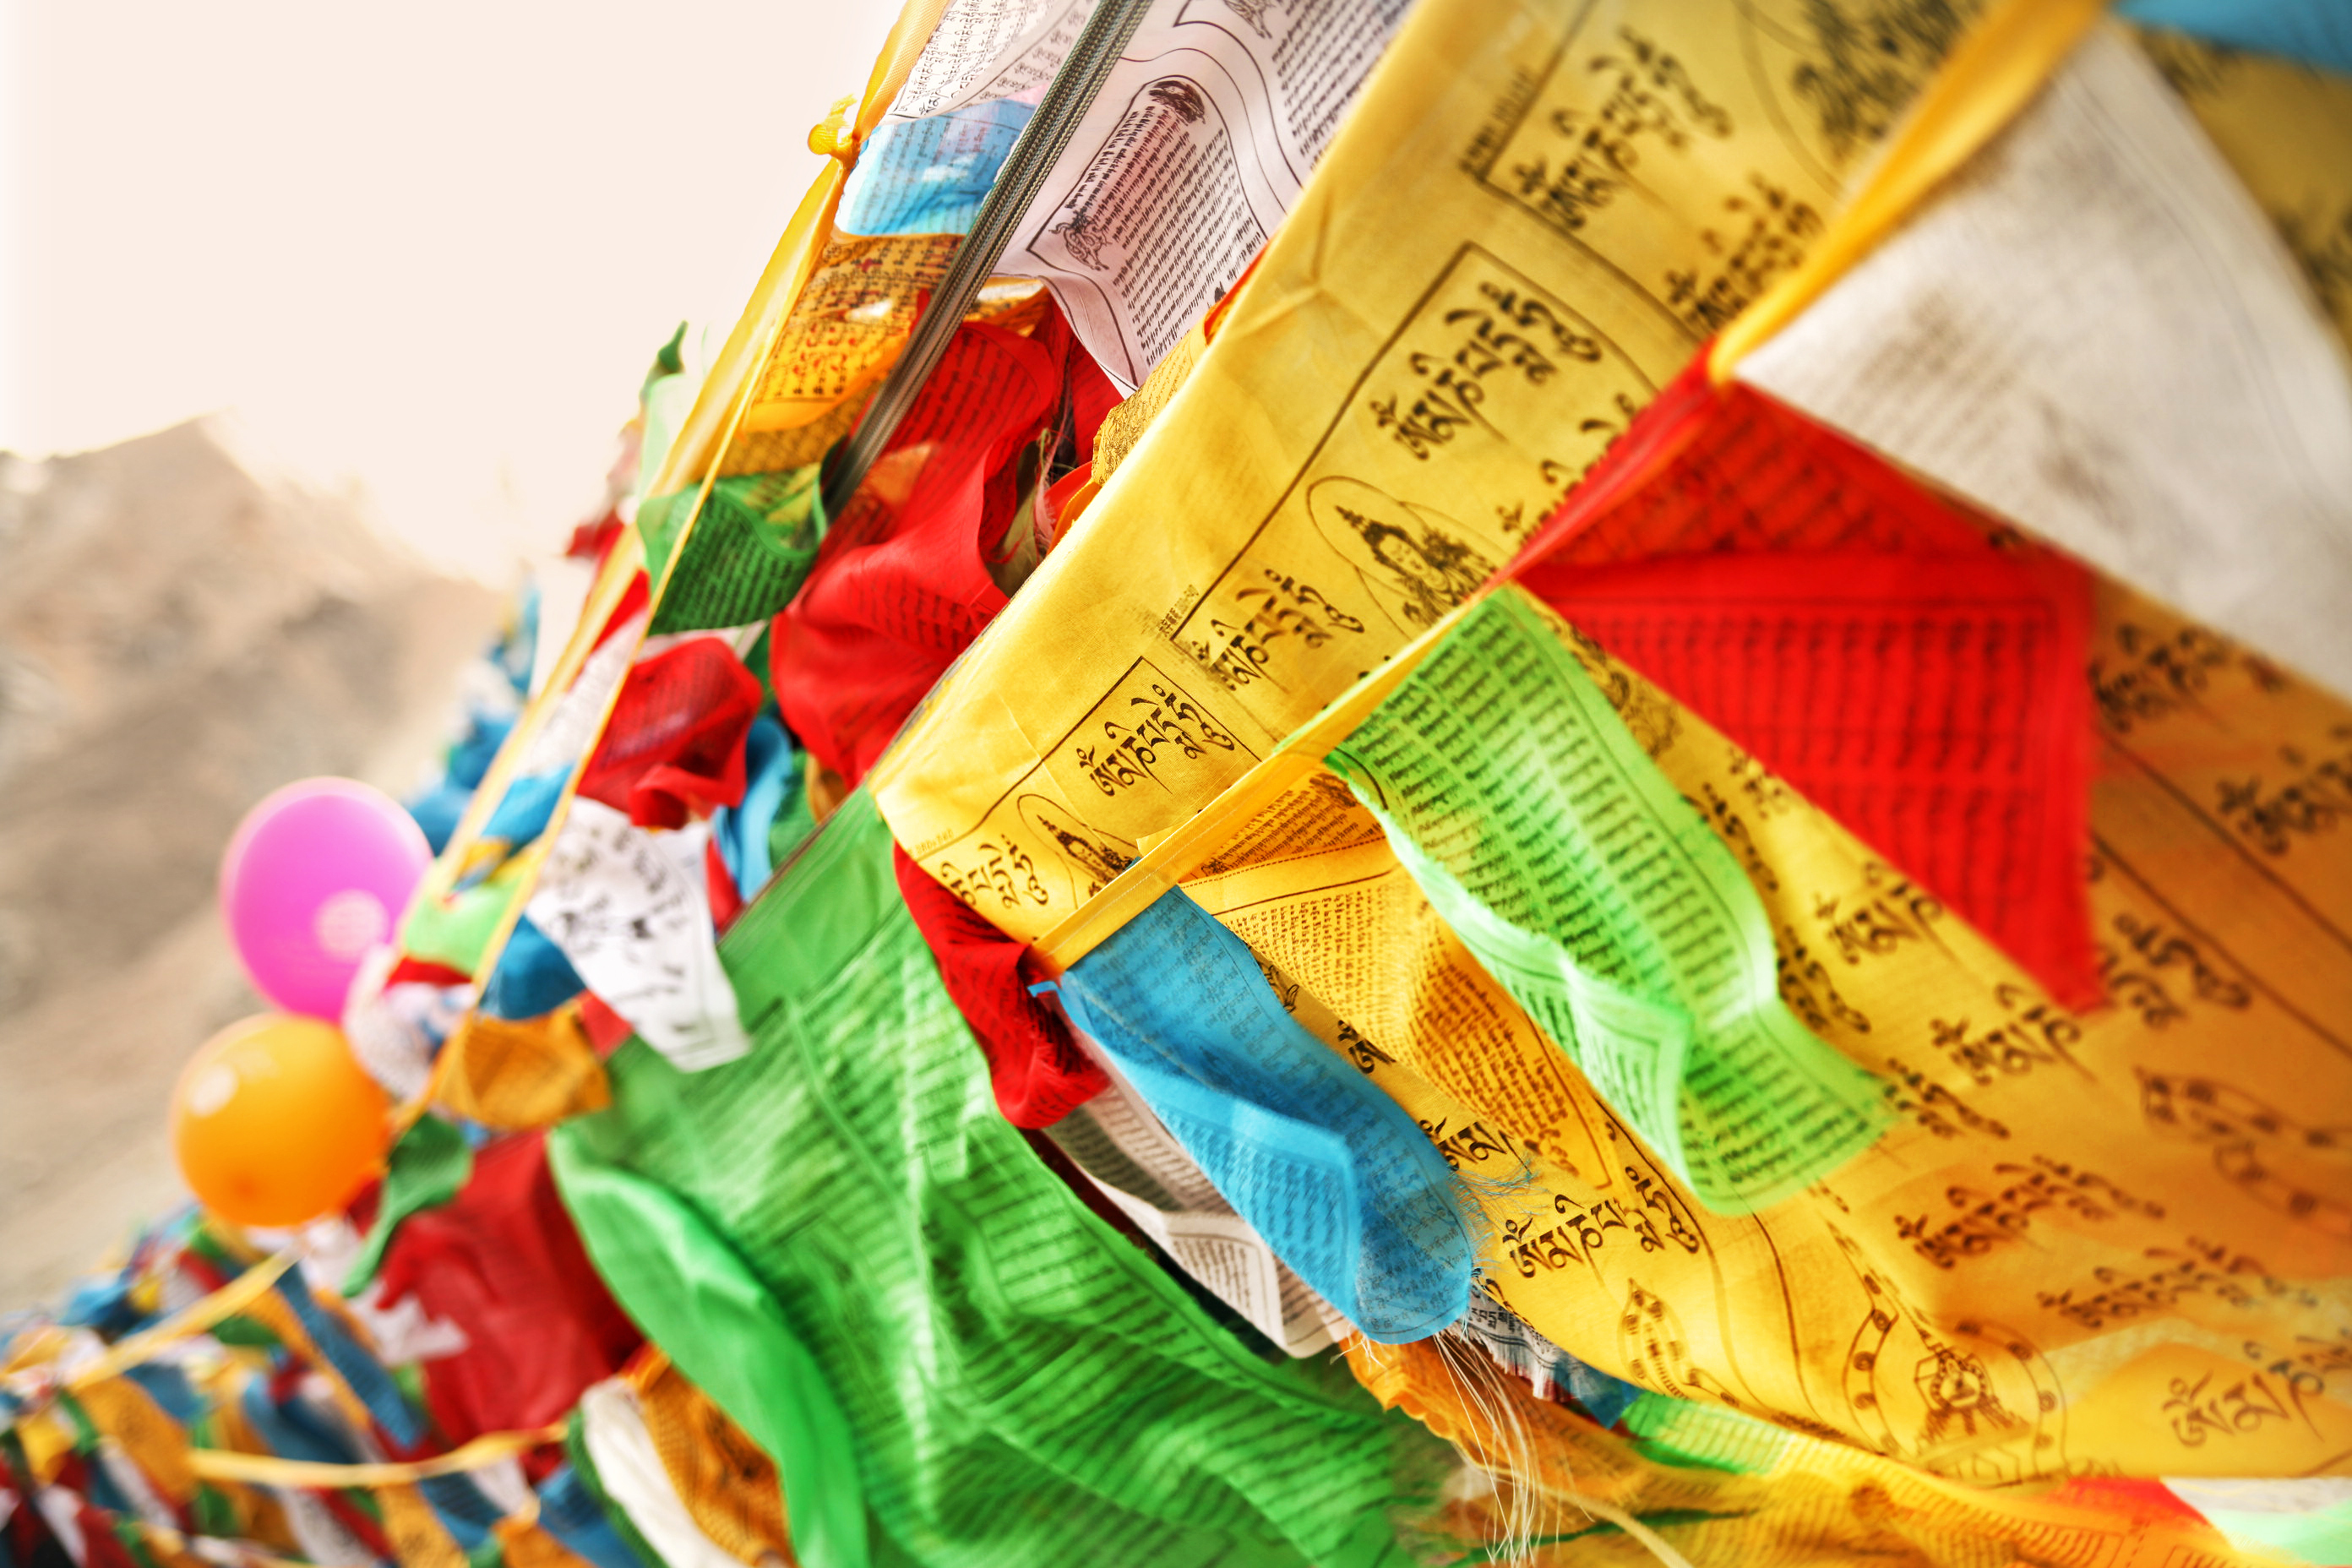 Prayer,Flags,And,Balloons,At,Mount,Everest,Base,Camp,In